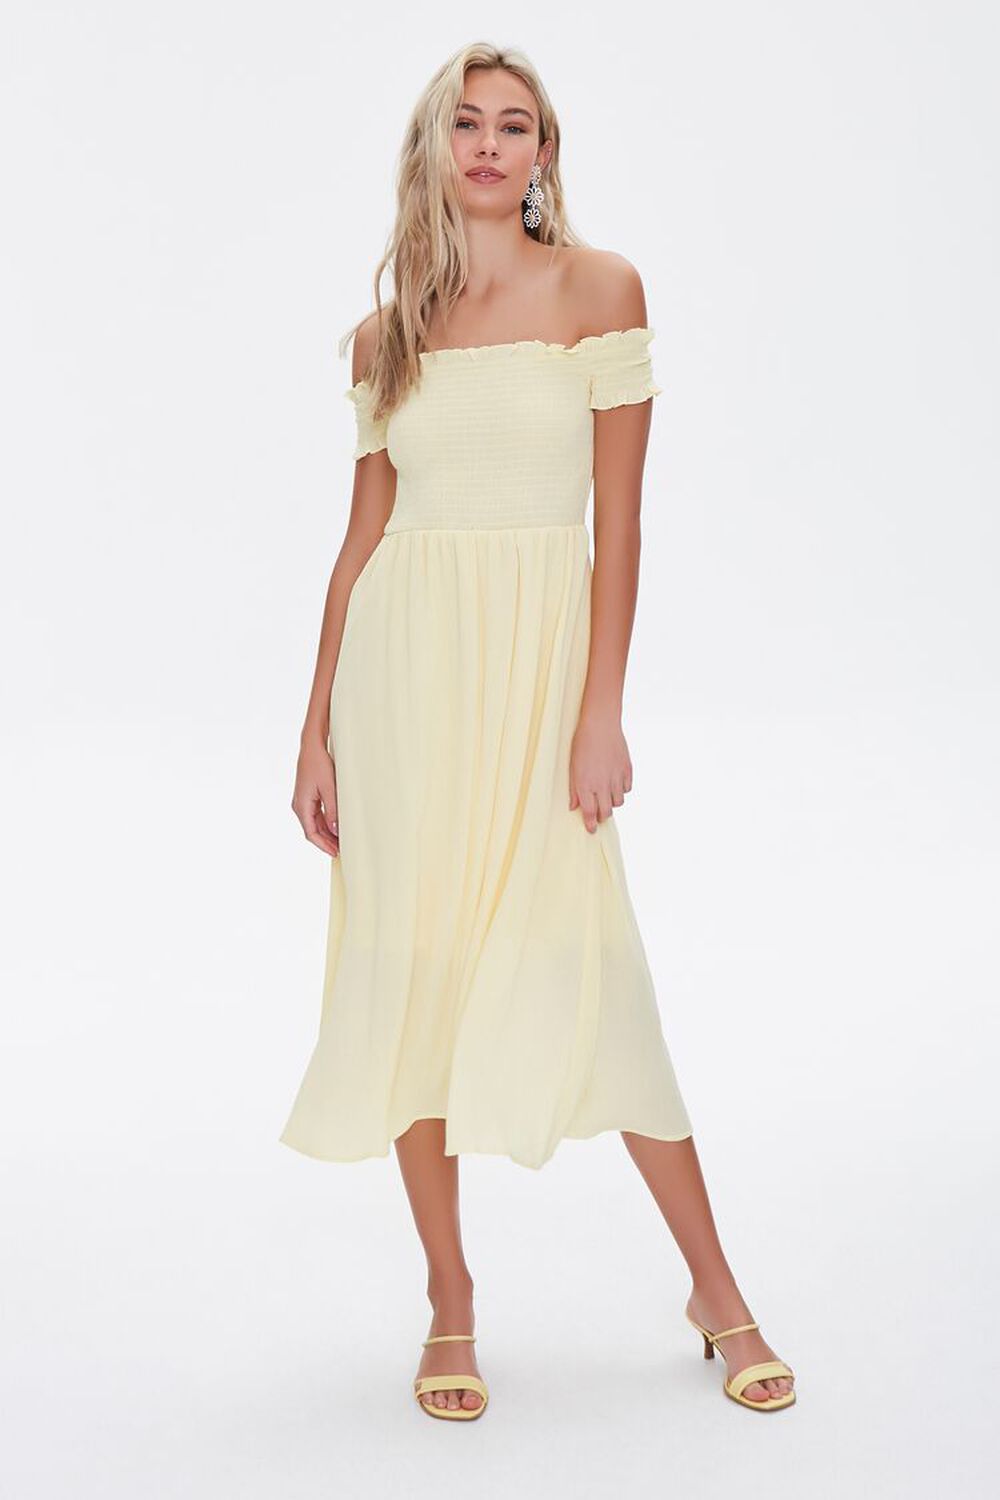 YELLOW Smocked Off-the-Shoulder Dress, image 2